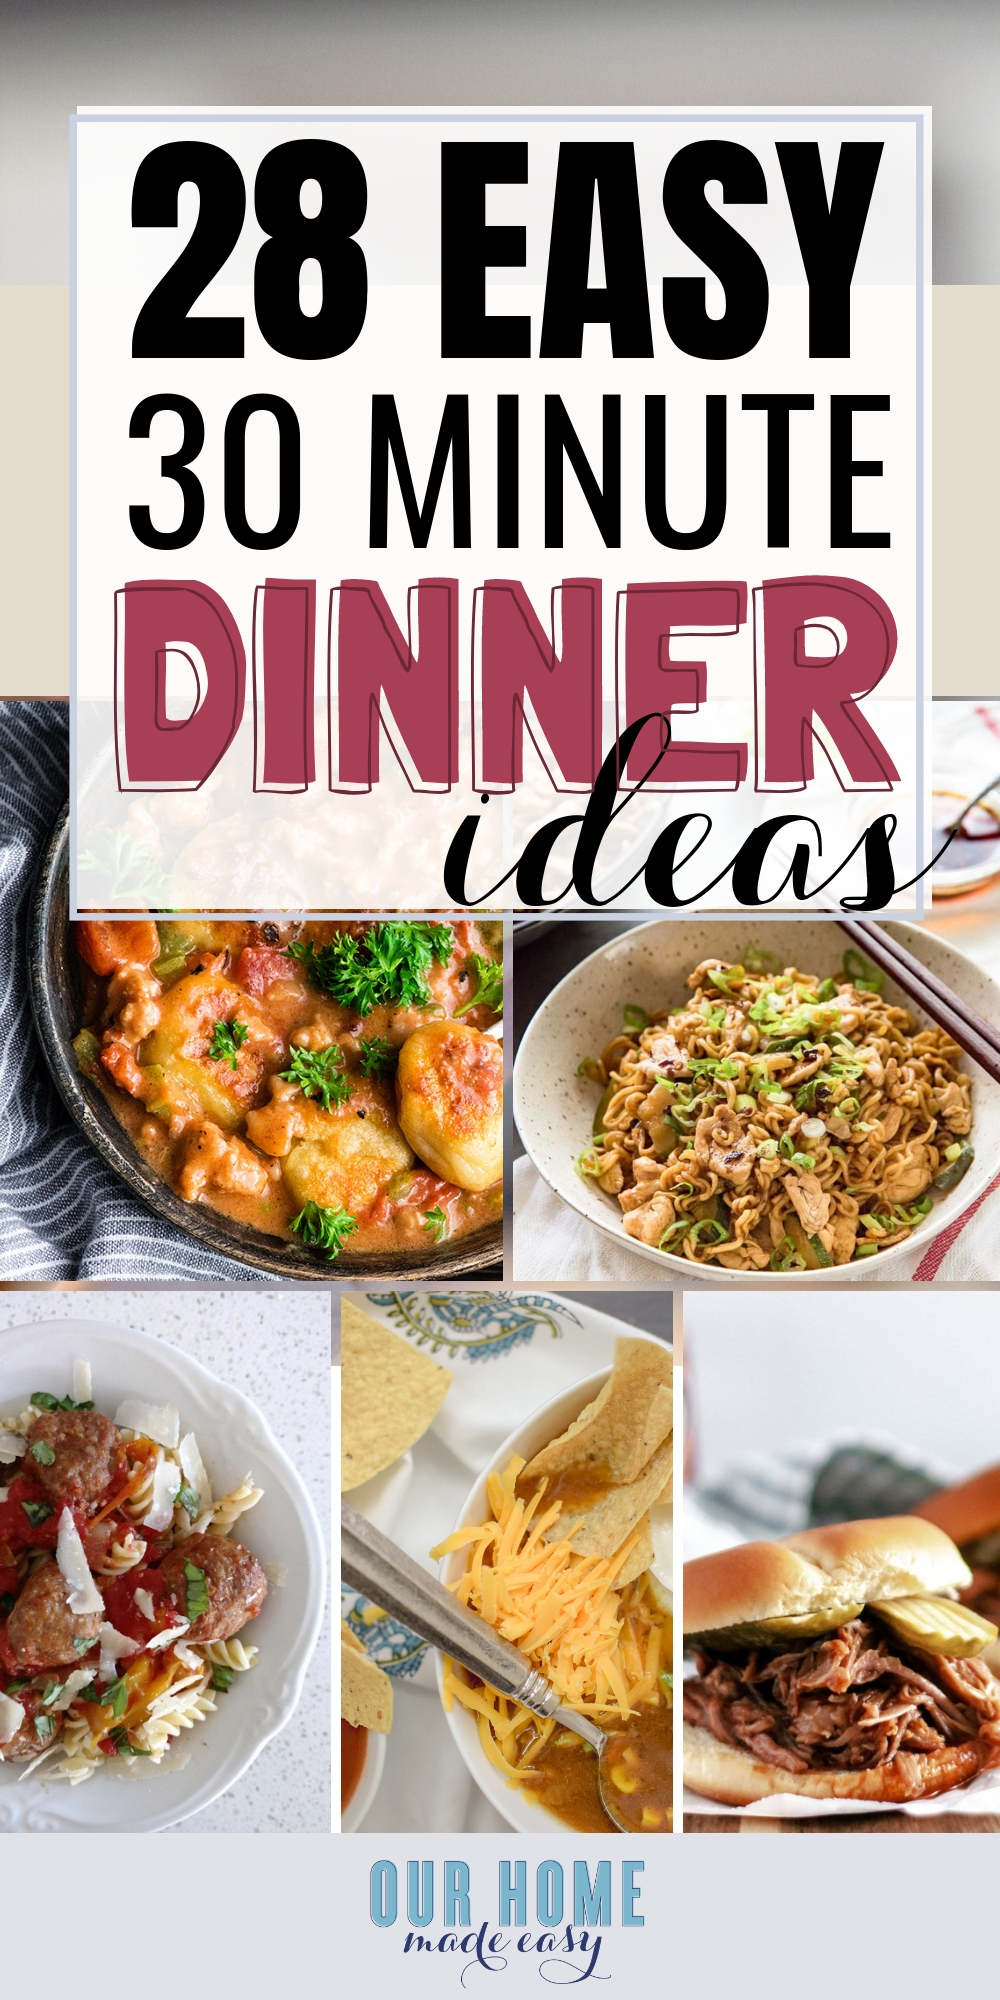 Keep this collection of easy 30 minute dinner ideas on hand for delicious dinners on busy nights.